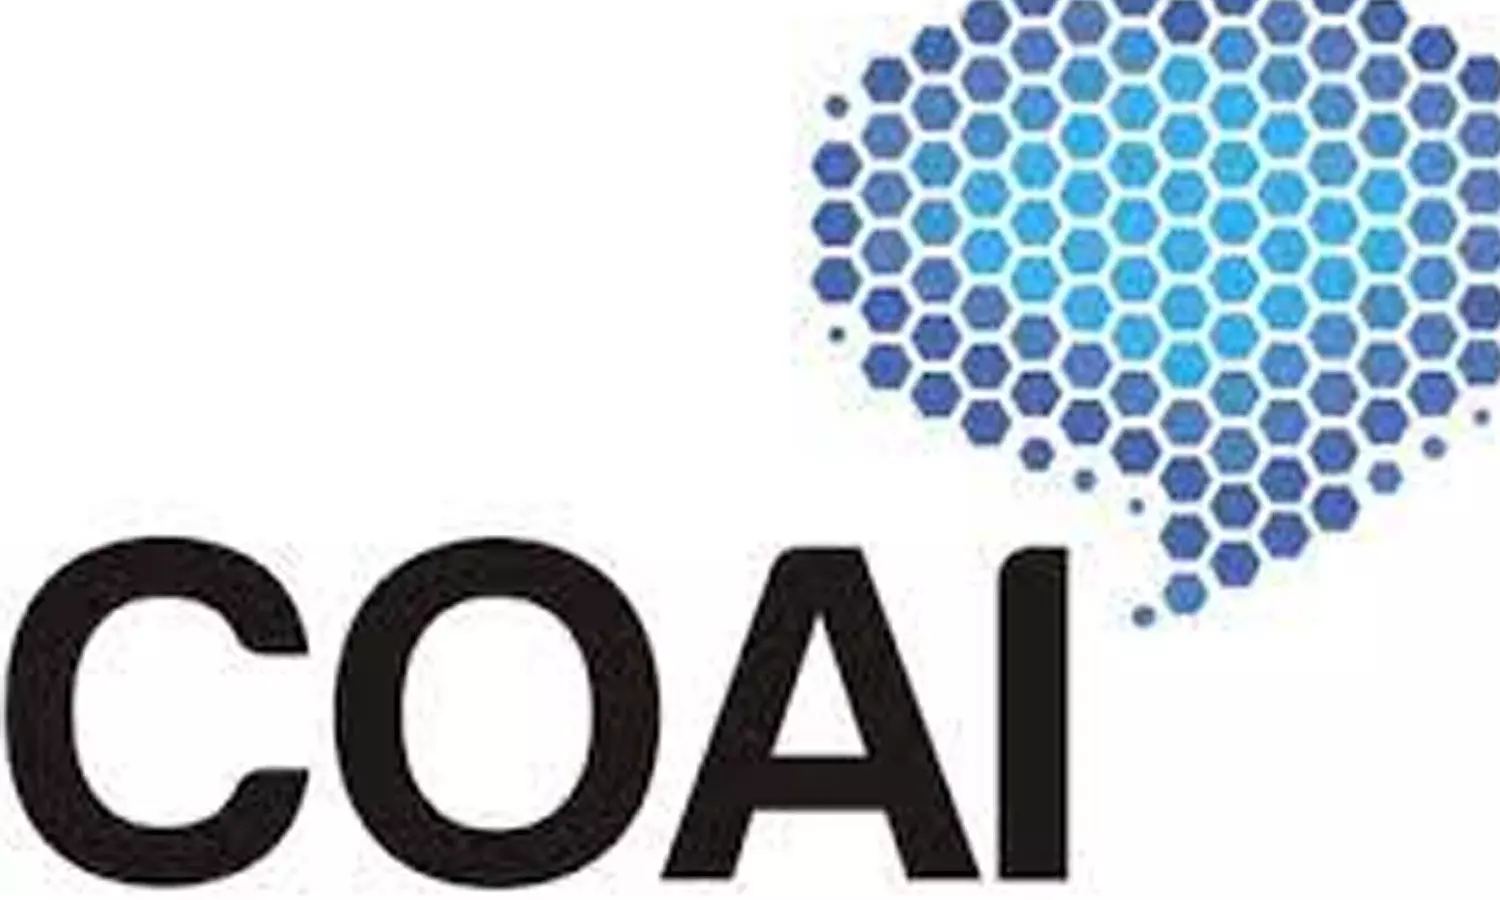 Theft of active telecom equipment at all-time high: COAI to DoT